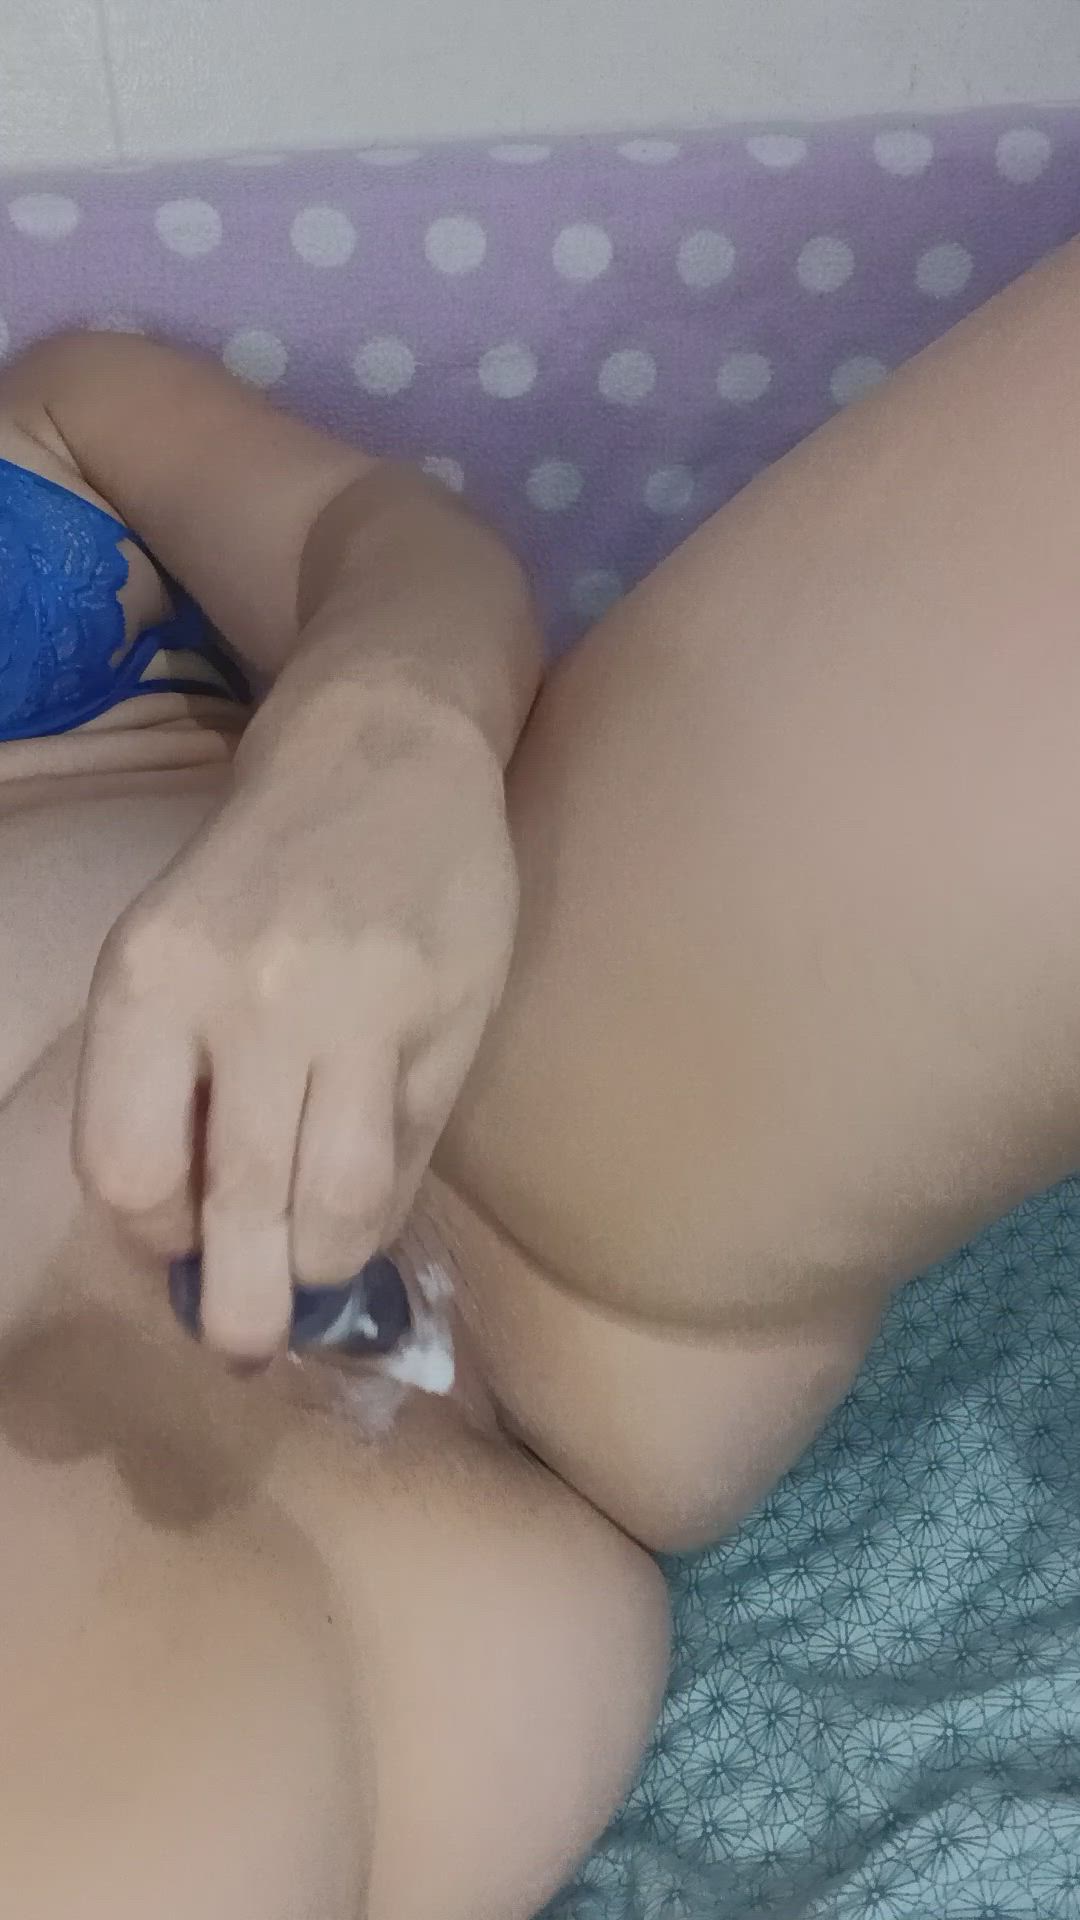 Pussy porn video with onlyfans model sweetlittlebaby26 <strong>@sweetbabylatina26</strong>